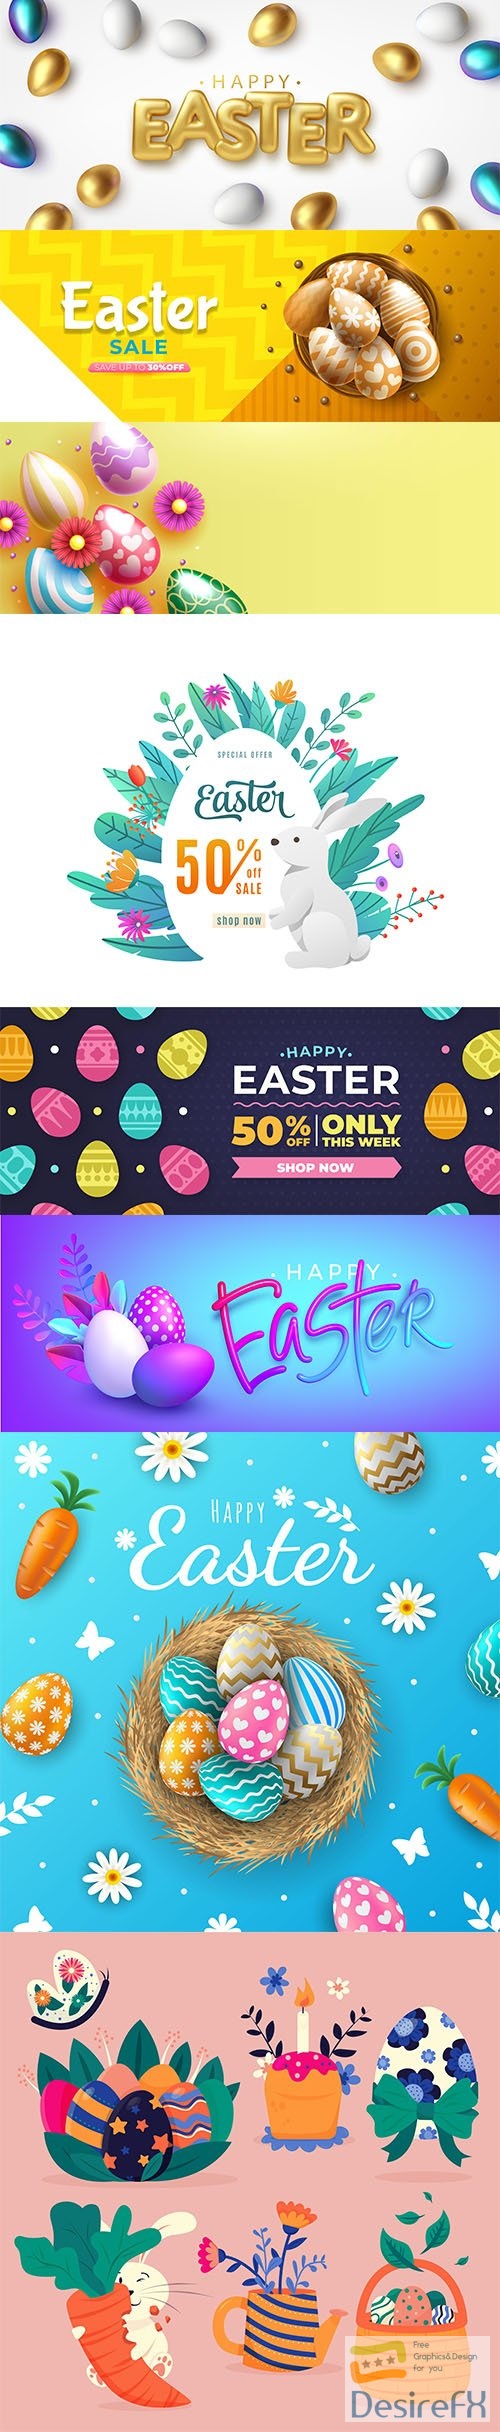 Hand-drawn cute easter illustrations and banner vol 4